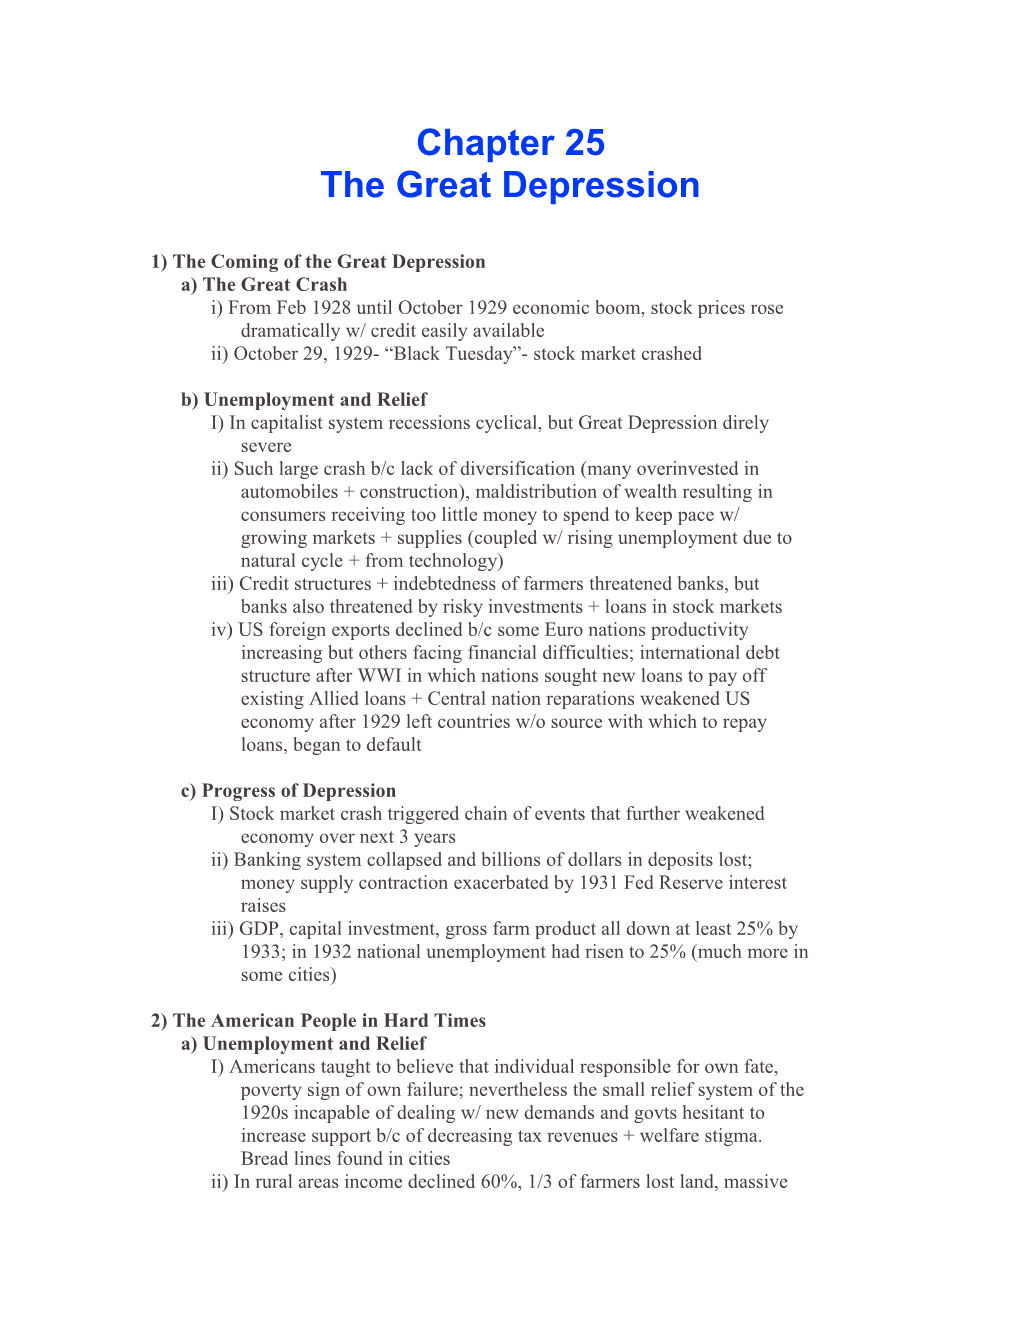 1)The Coming of the Great Depression